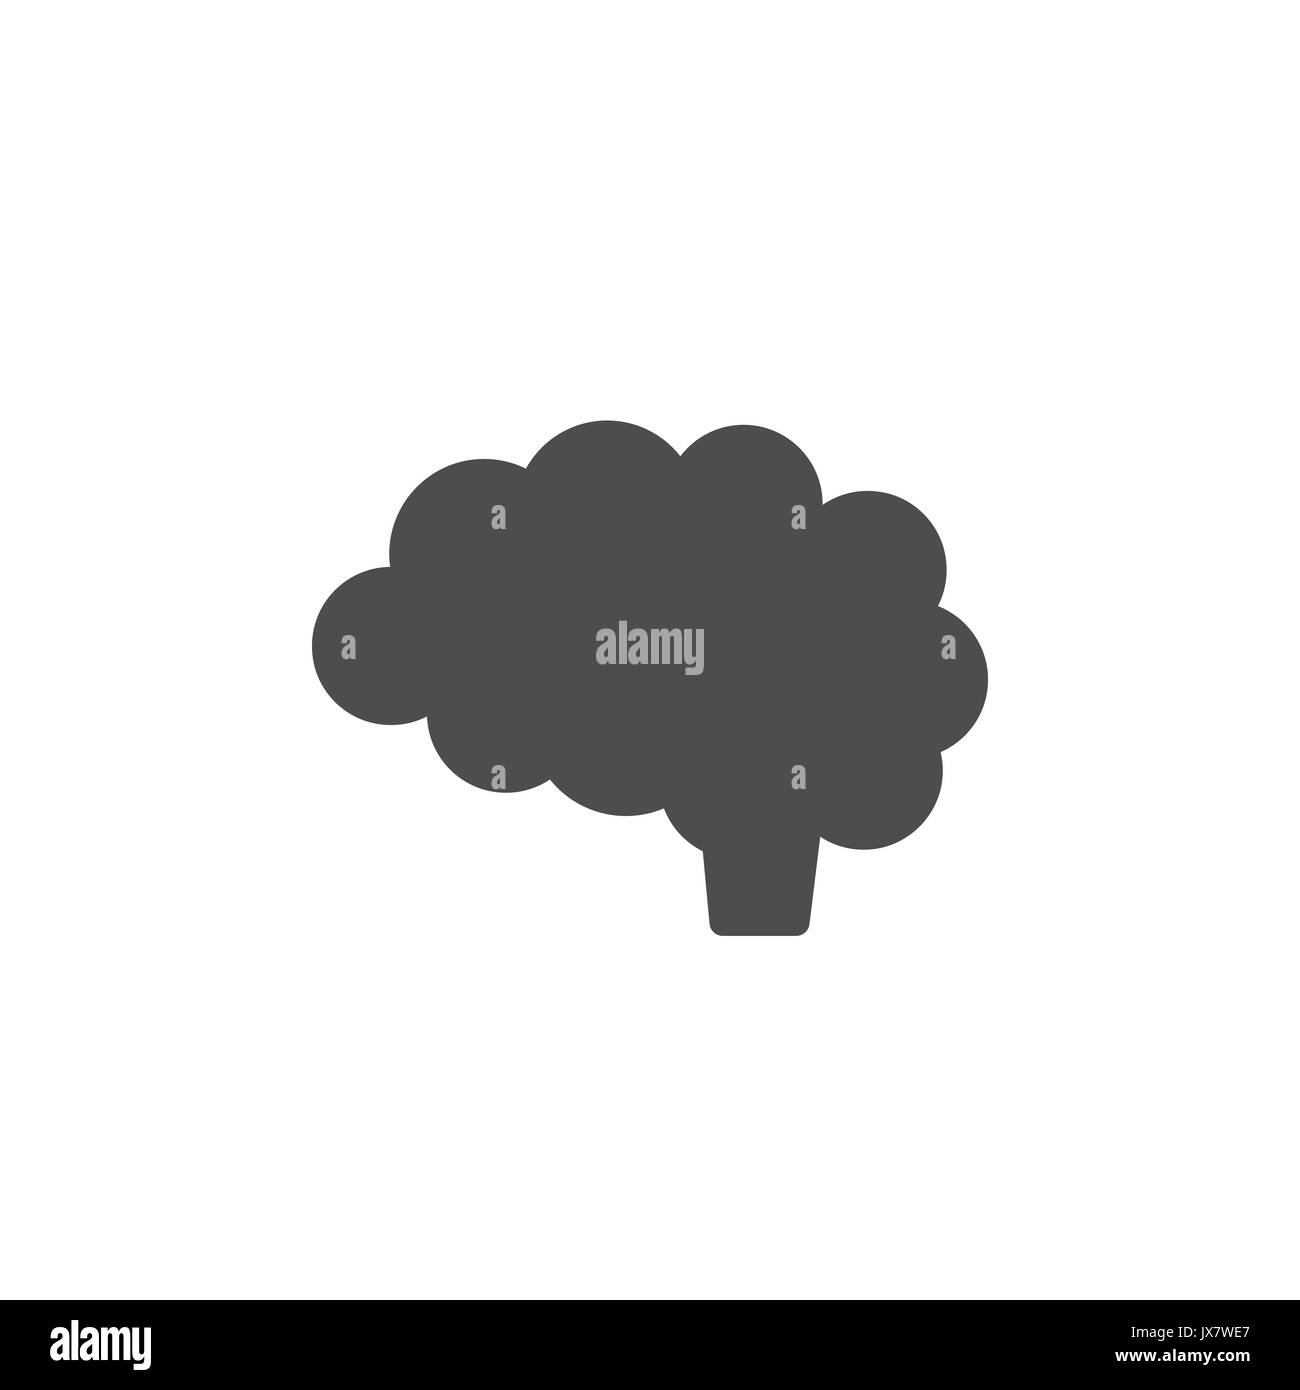 Isolated brain icon on white background illustration Stock Vector